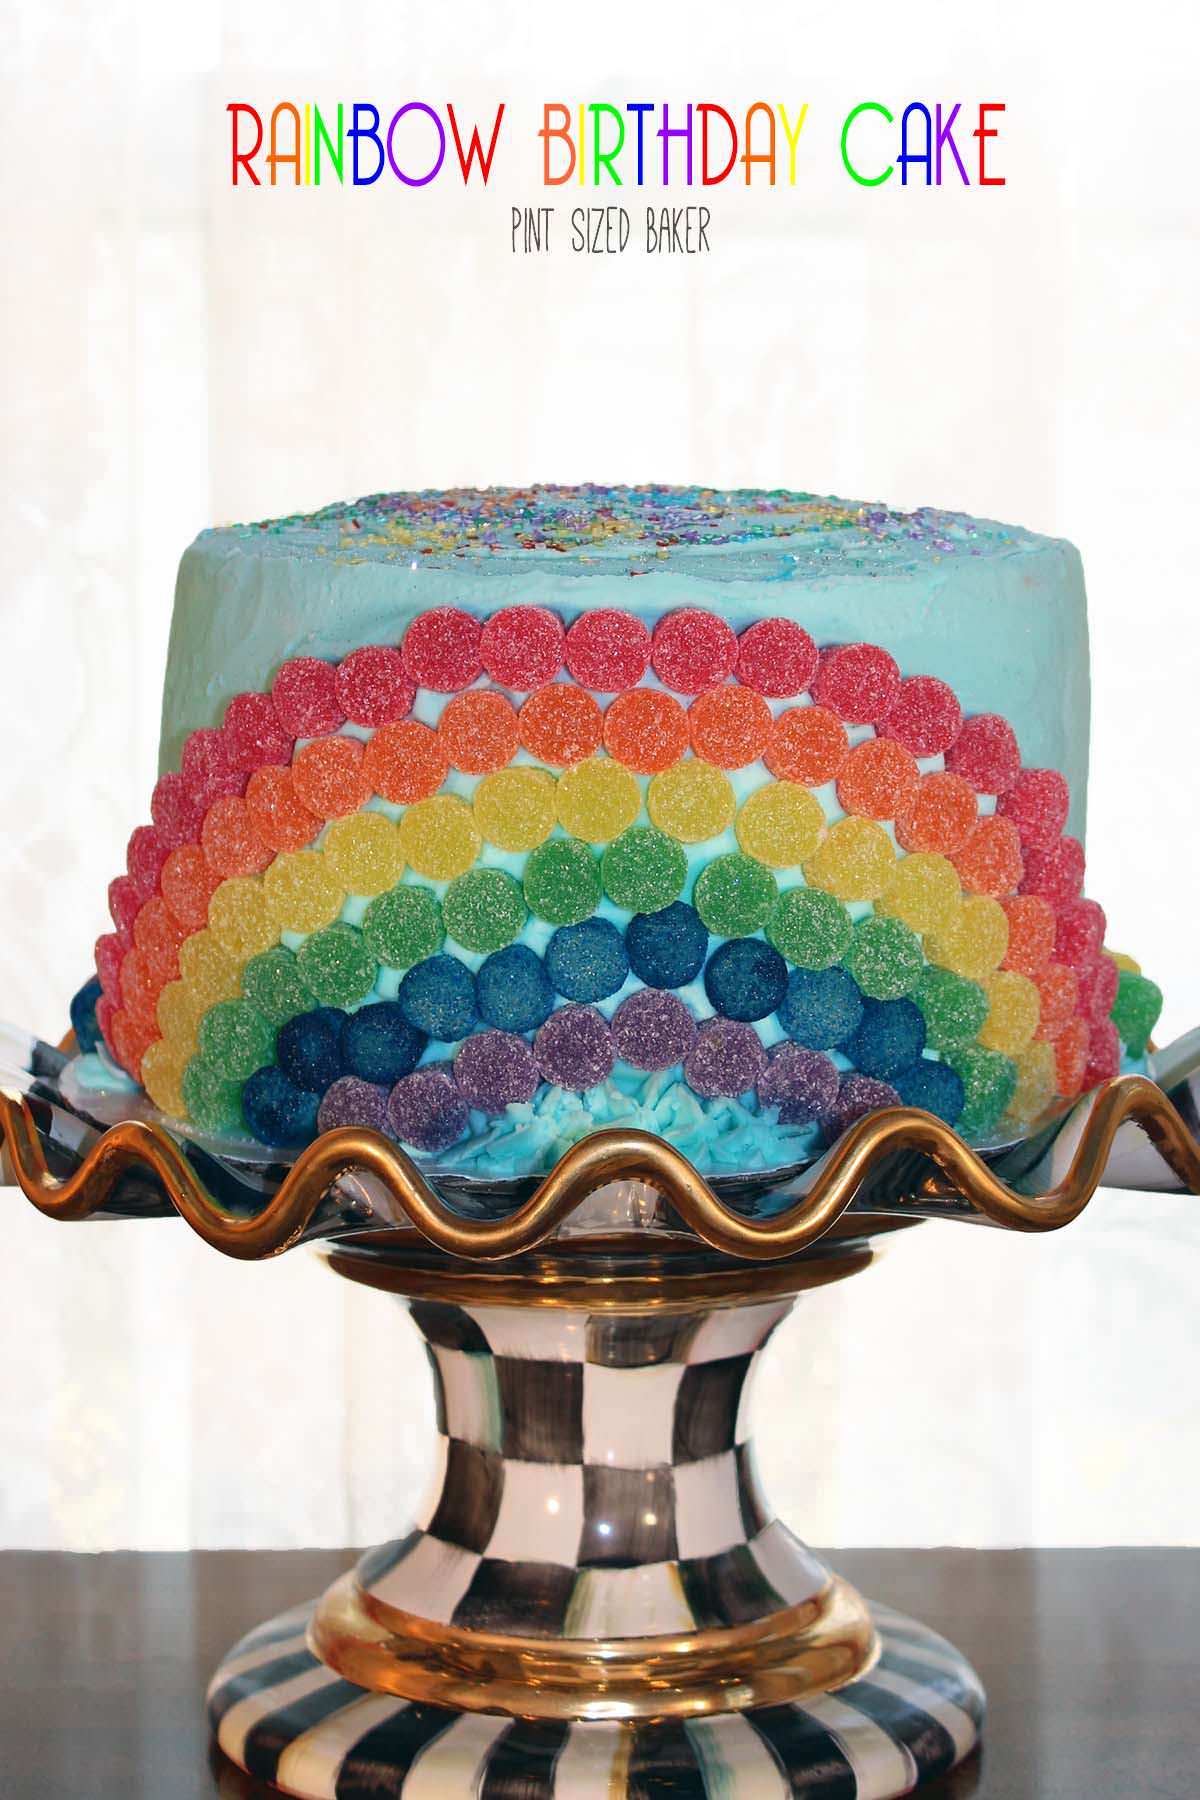 Creating a Rainbow Birthday Cake is fun to make, but it's even more exciting seeing the look on your kids face when you cut into it!